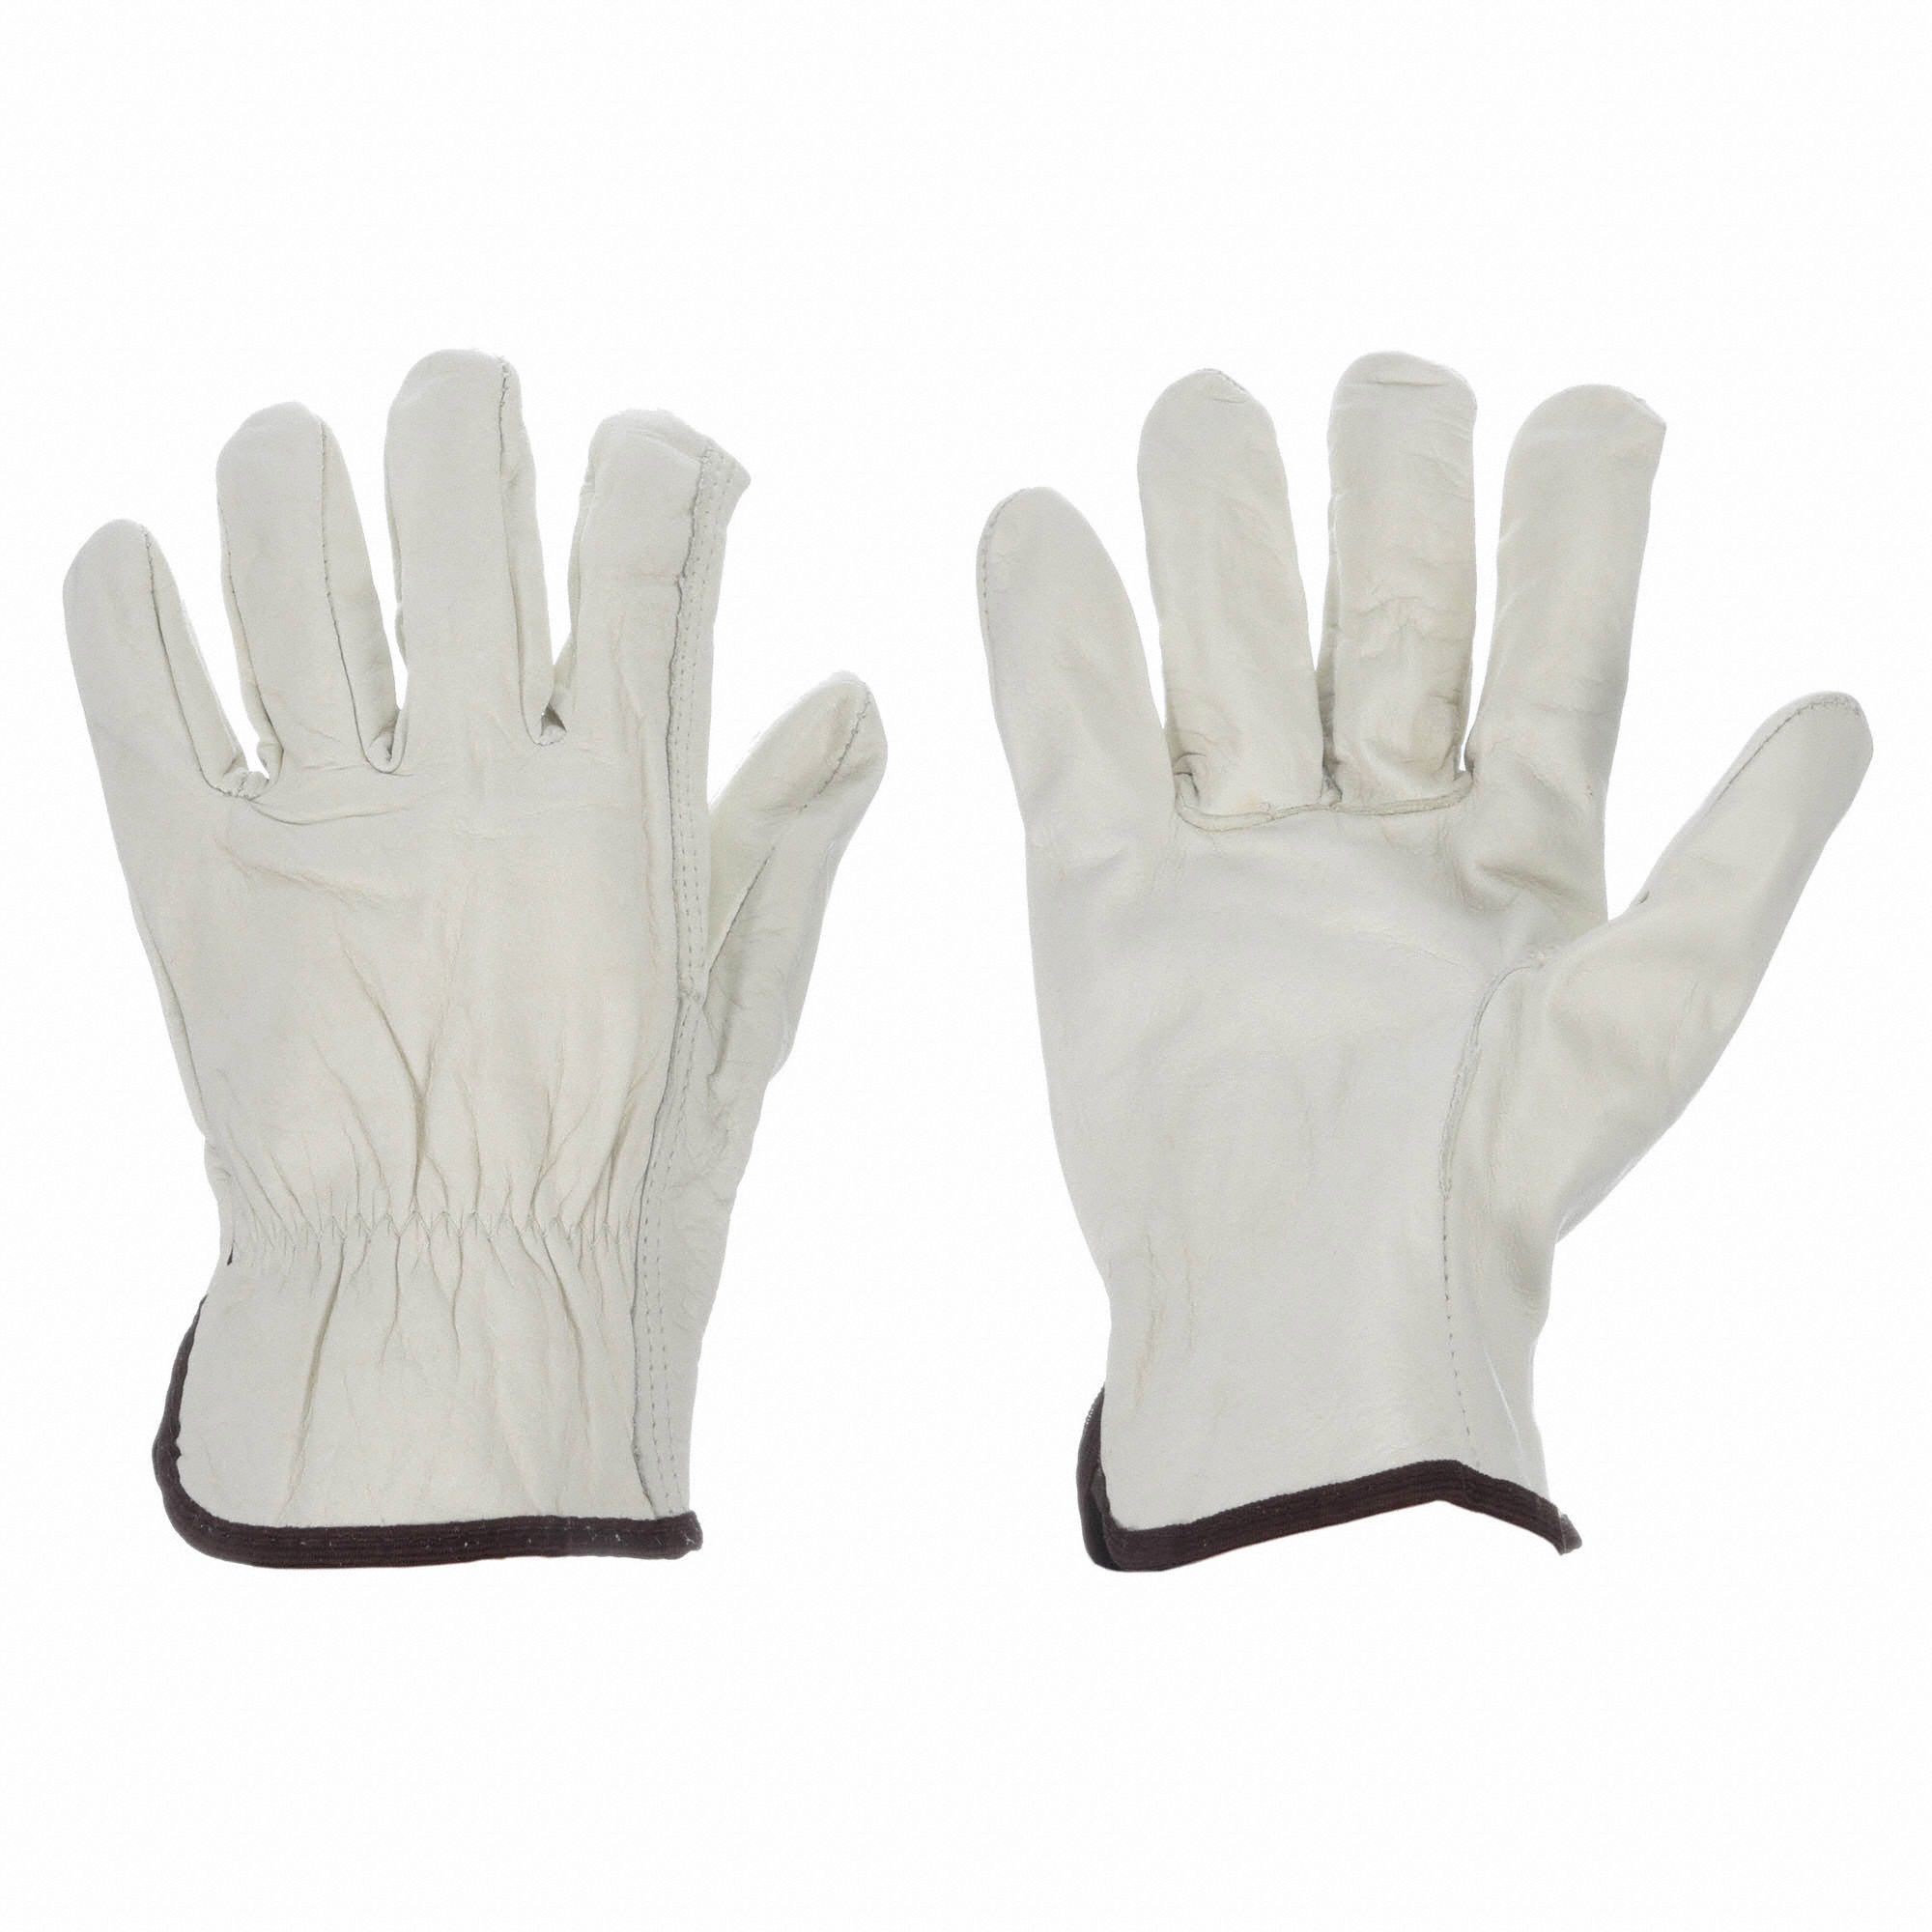 High Voltage Electrical Electrician Safety Work Gloves Insulation